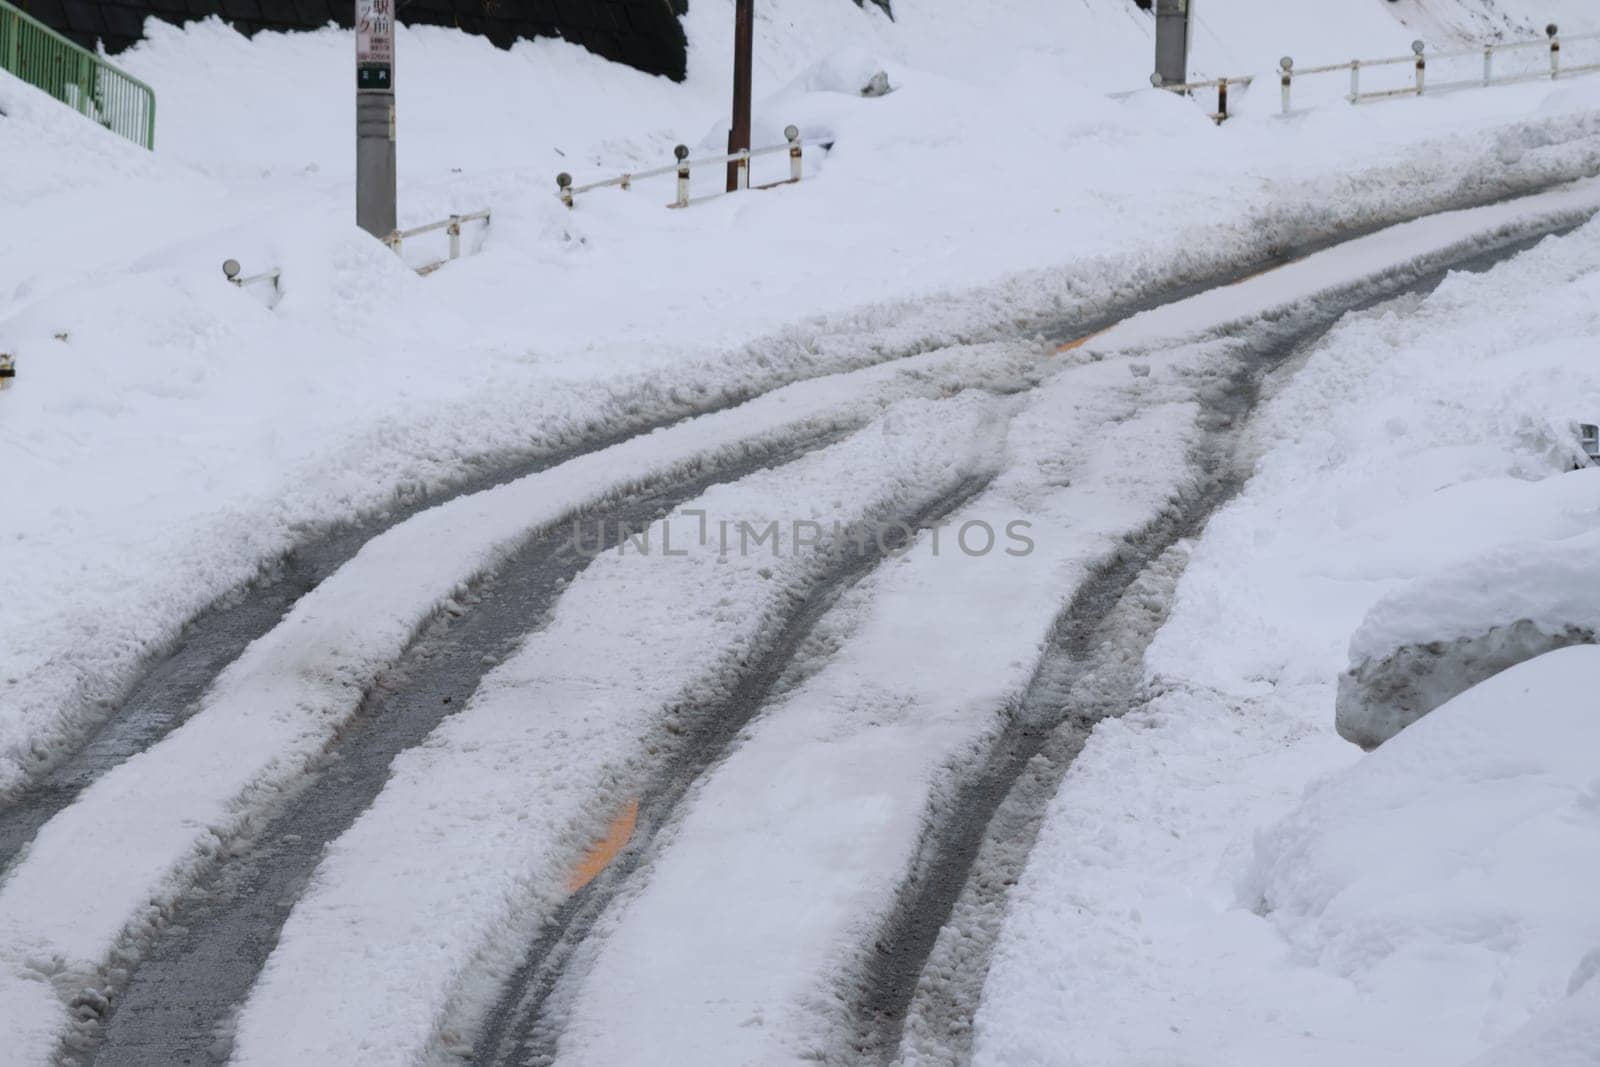 Winter scene with tire tracks on a snow-covered road, indicating recent vehicle passage. by jameshumble